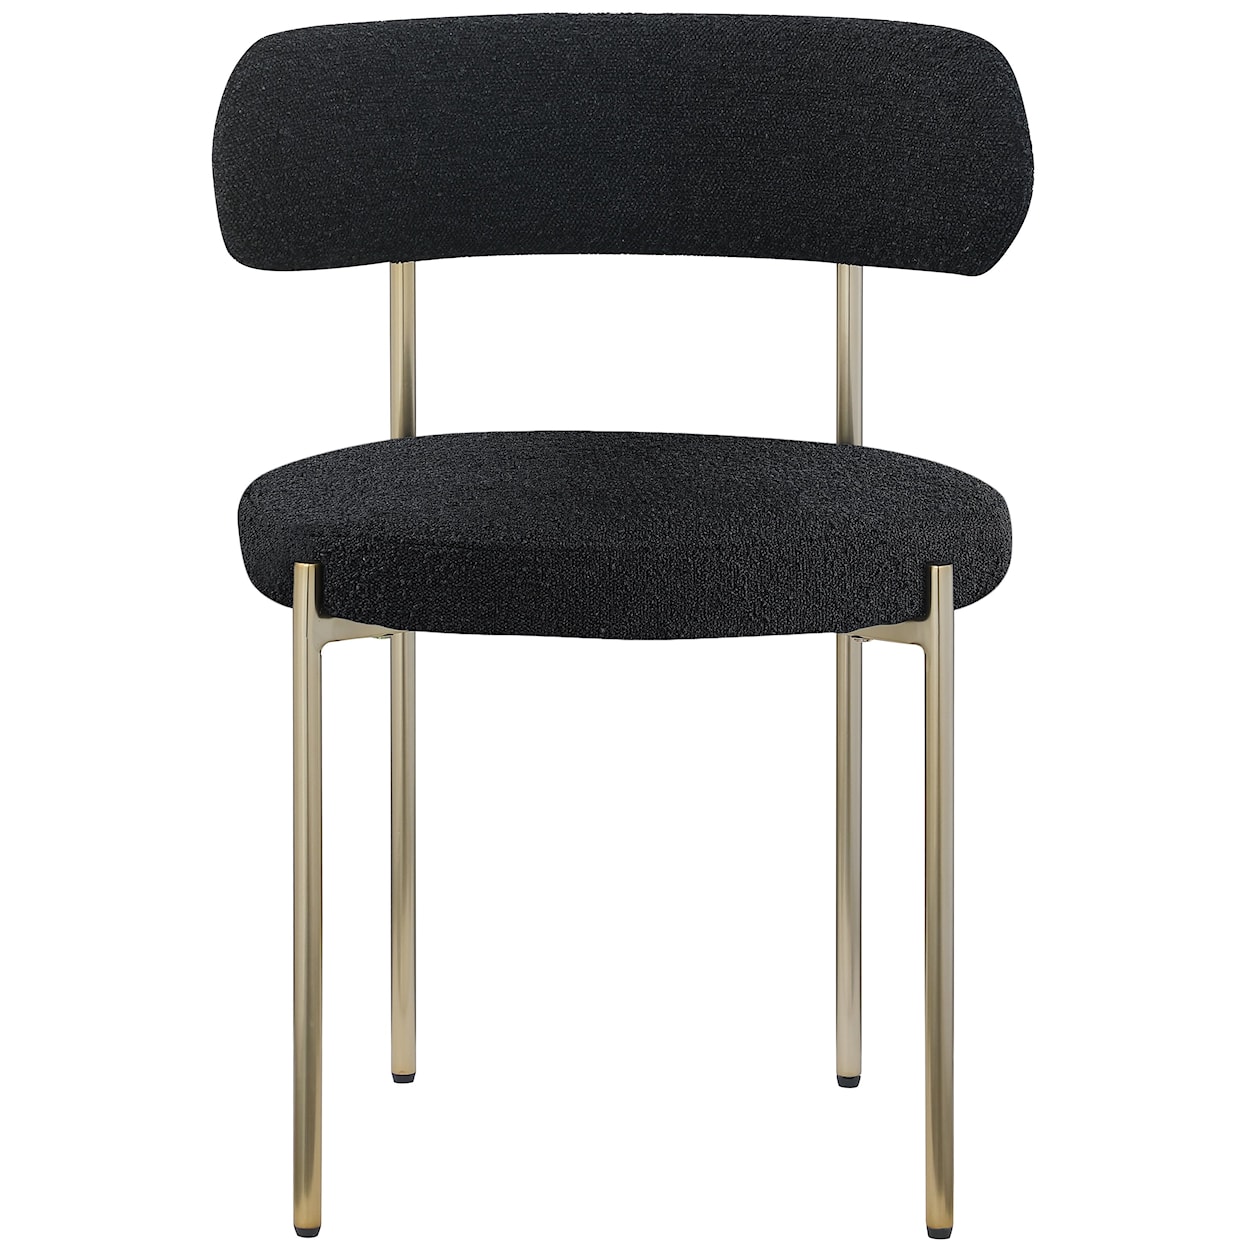 Meridian Furniture Beacon Fabric Dining Chair with Brass Iron Frame